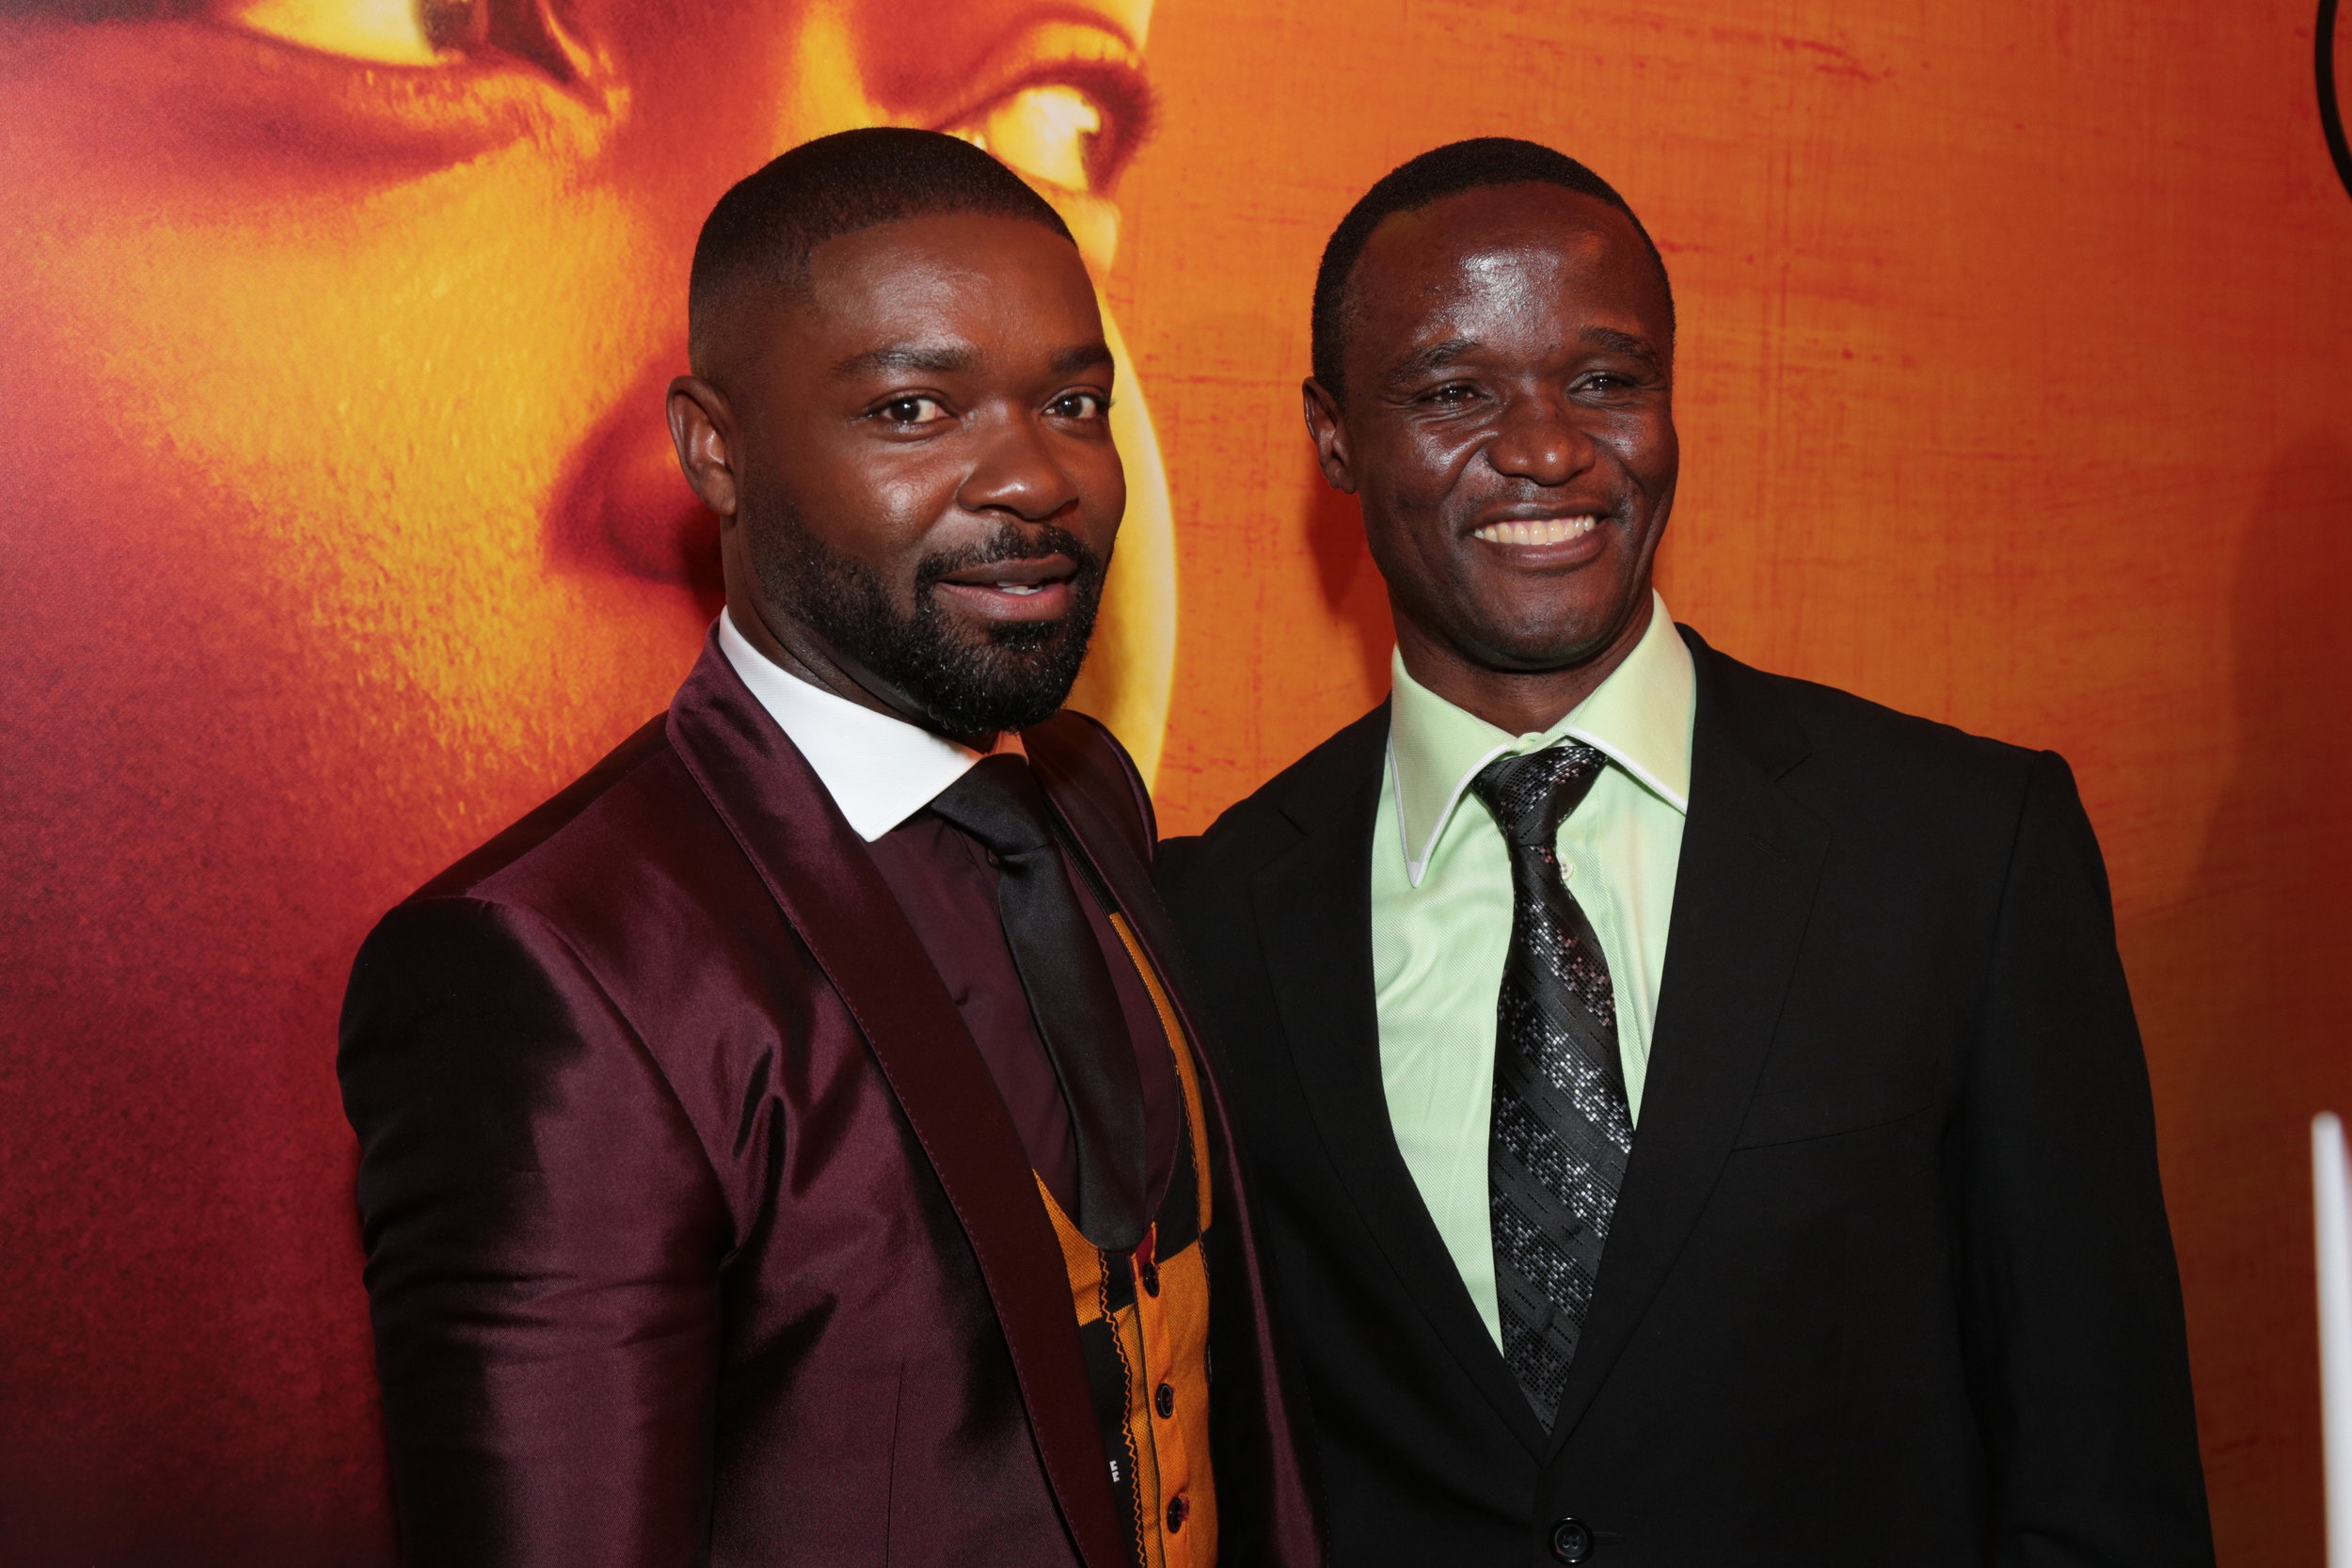 David Oyelowo and Robert Katende arrive at the U.S. premiere of Disney's Queen of Katwe at the El Capitan Theatre in Hollywood, CA on Tuesday, September 20, 2016. (Photo: Alex J. Berliner/ABImages)